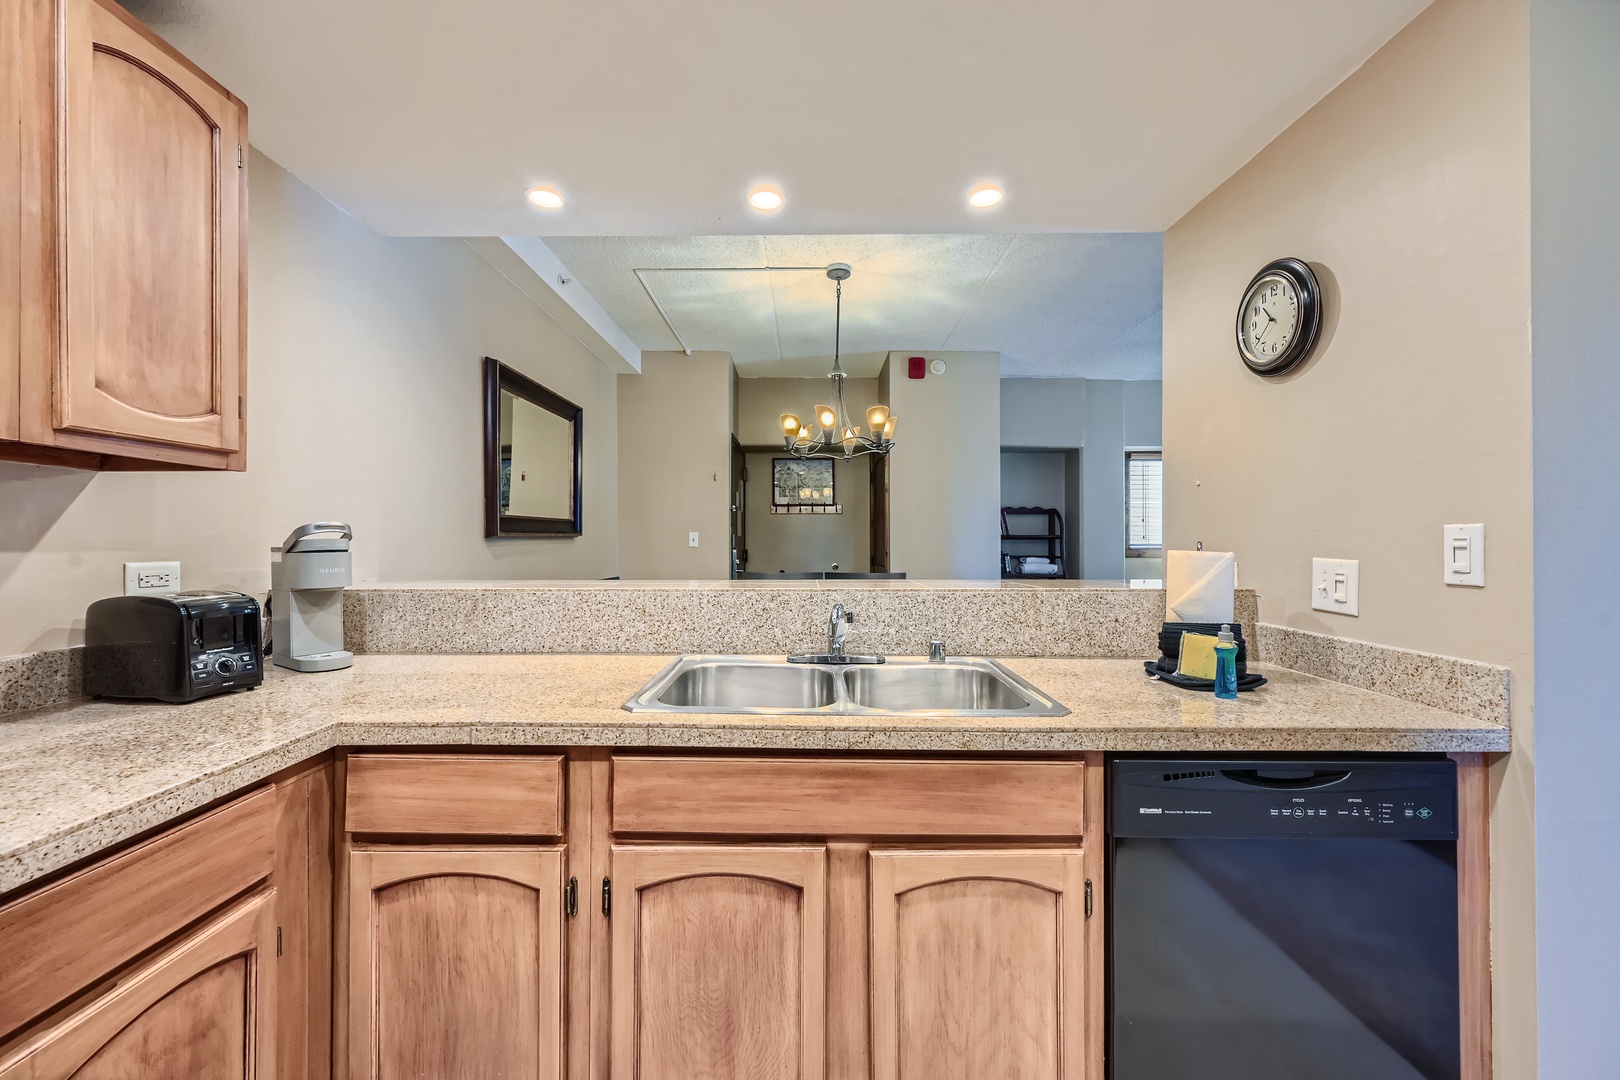 The kitchen provides abundant storage and all the conveniences of home